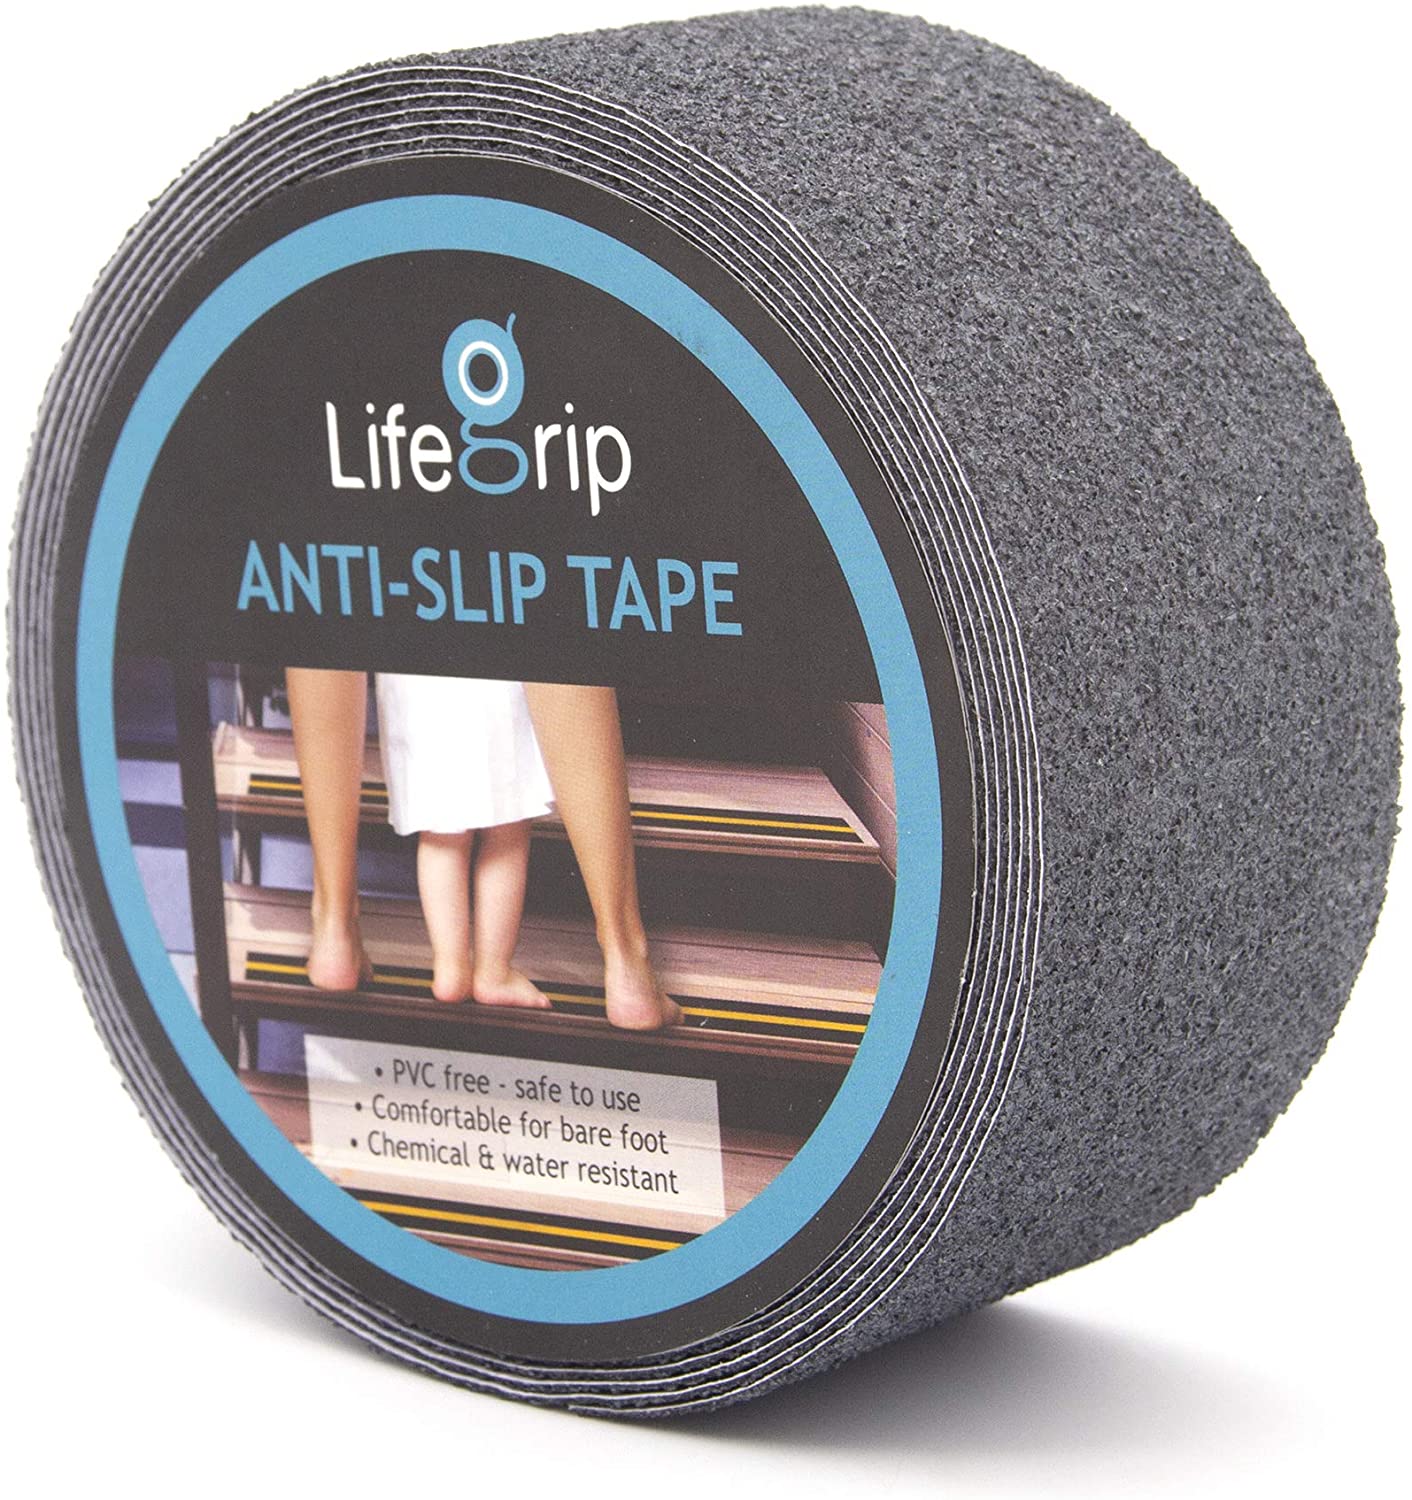 LifeGrip Stay on Track, LifeGrip Anti Slip Safety Tape, Non Slip Stair Tread, Textured Rubber Surface, Comfortable for Bare Foot, 2 inch X 15 foot, Grey